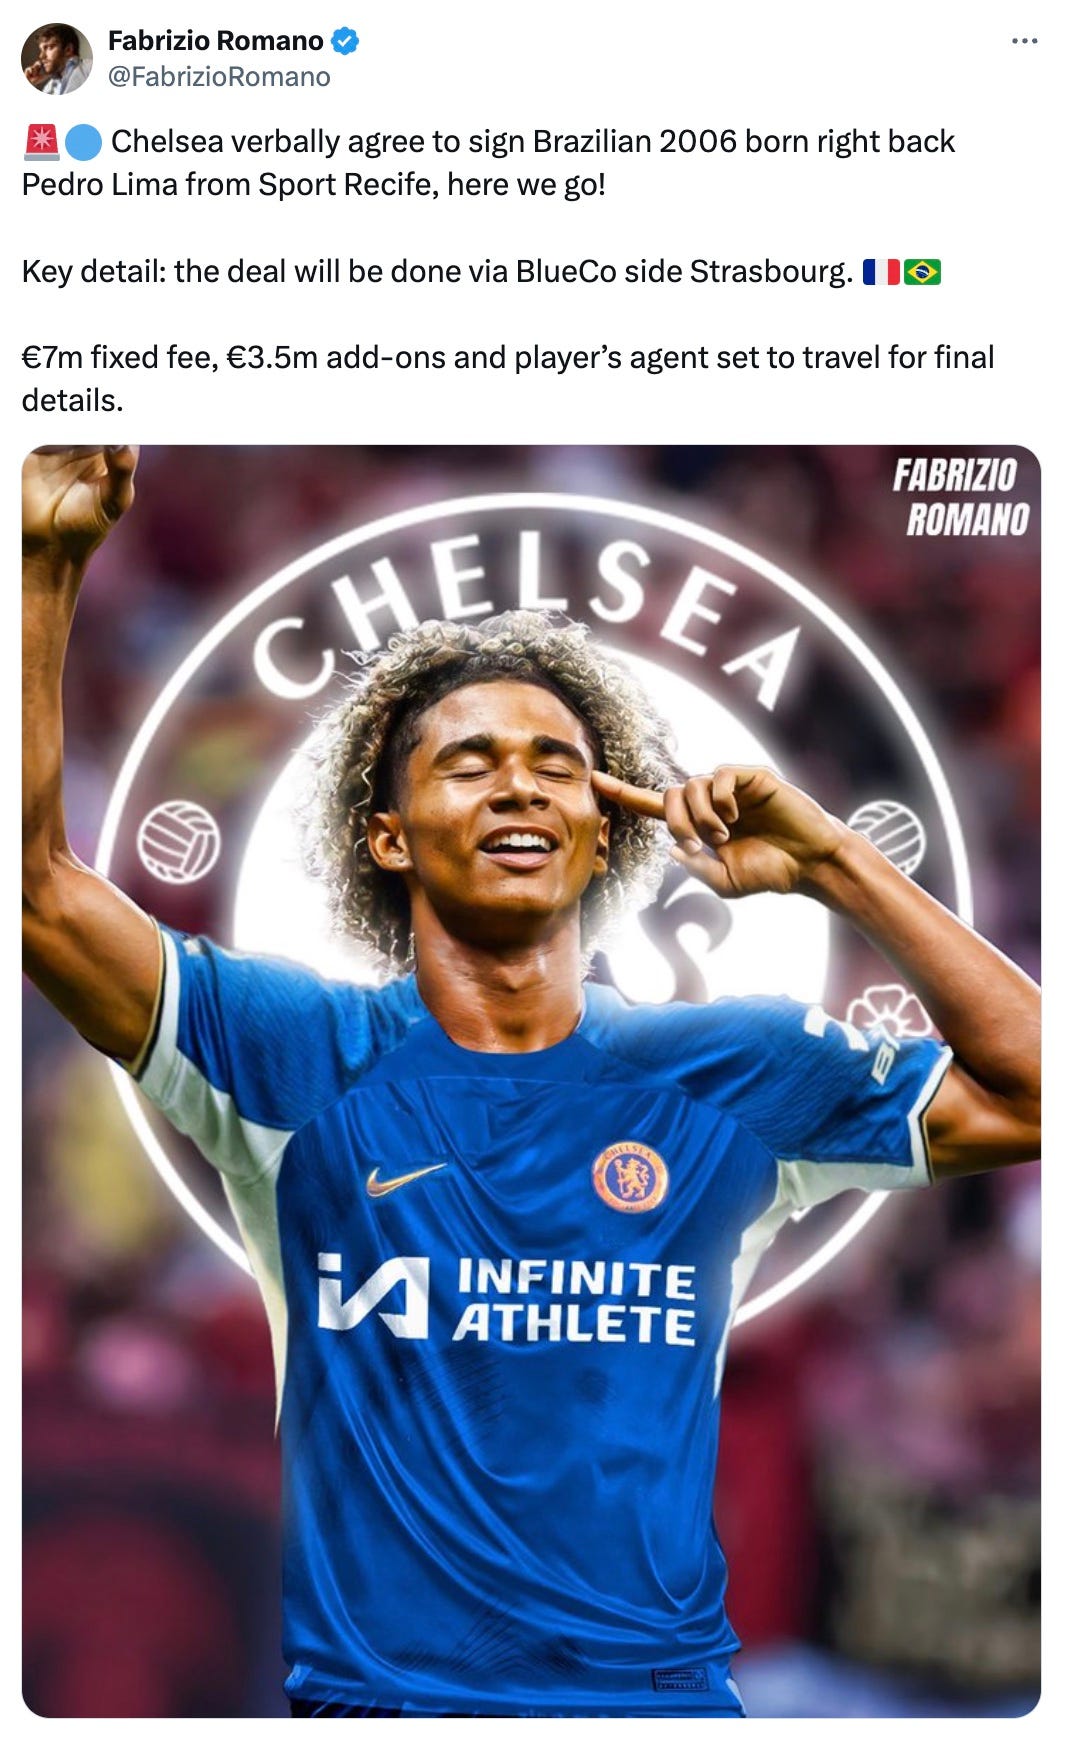 A tweet by Fabrizio Romano about Chelsea agreeing a deal to sign Pedro Lima